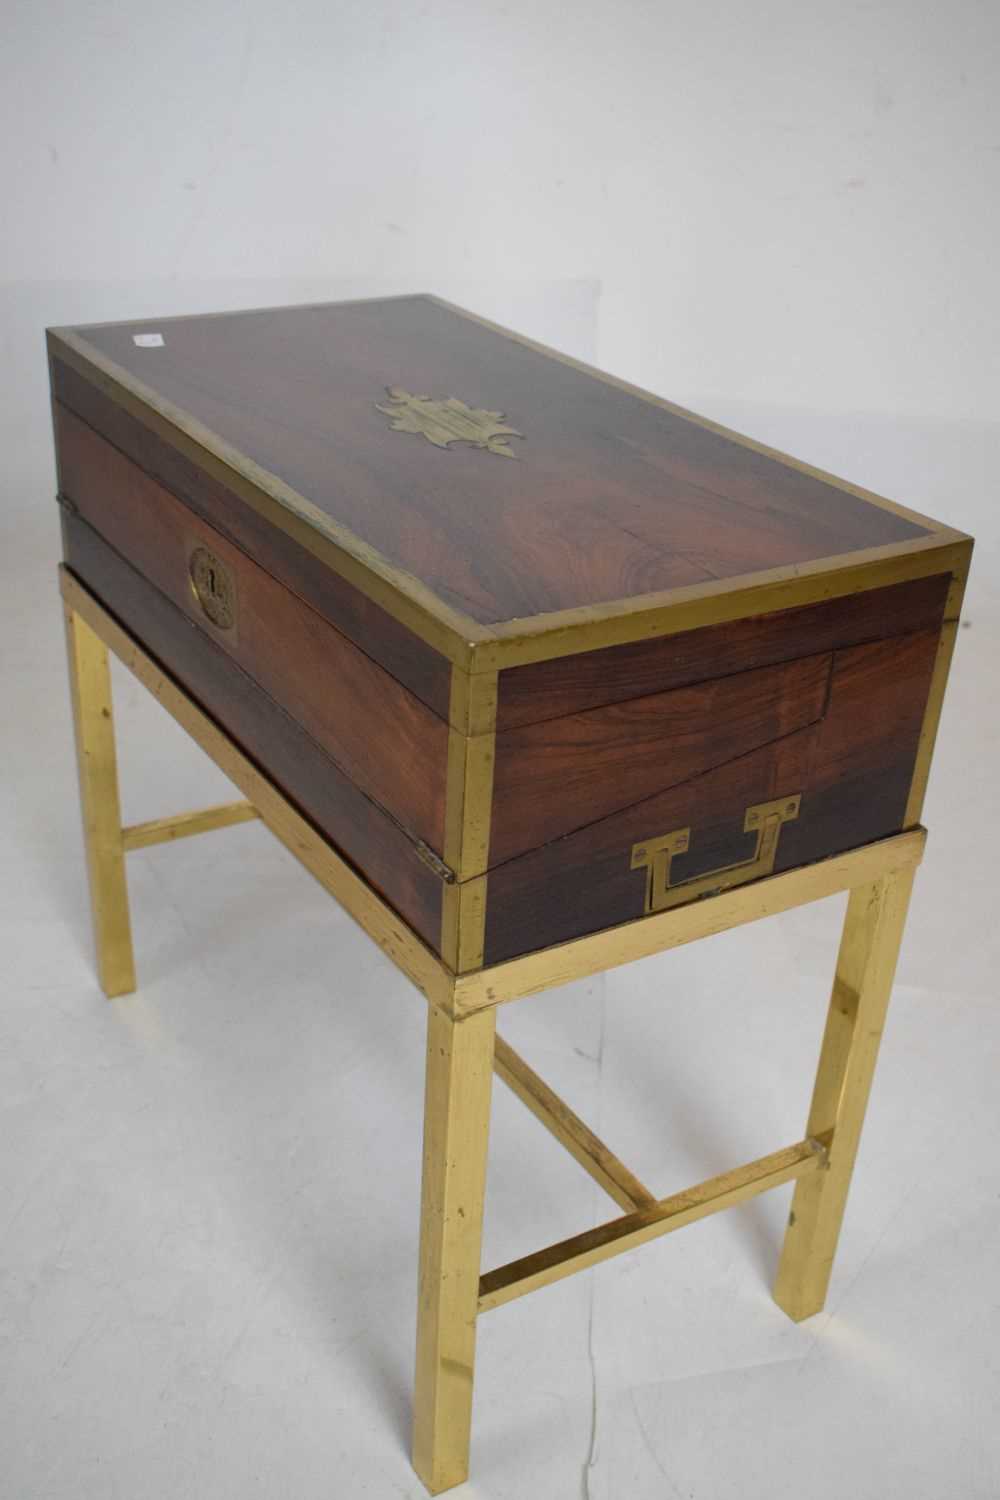 Brass bound writing box, Tompson's patent on later brass stand - Image 5 of 6